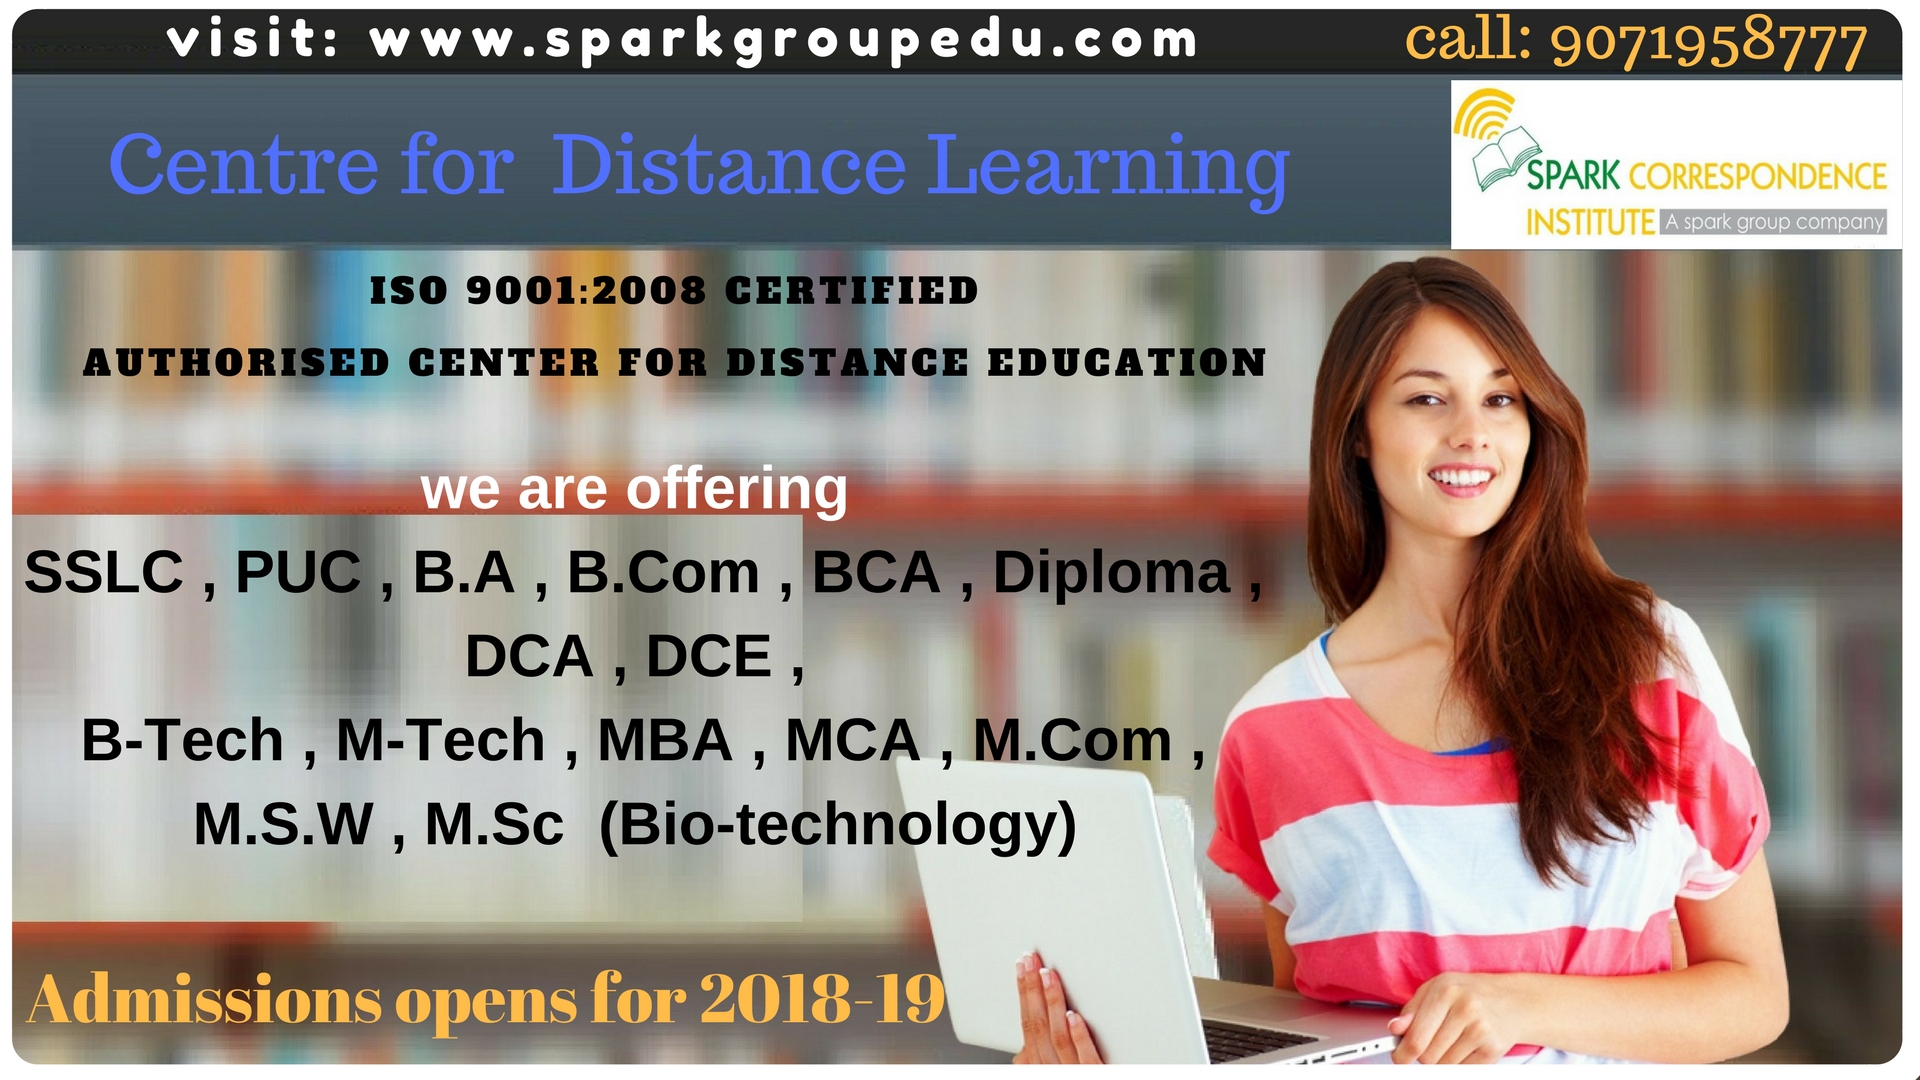 Best Opportunity To Complete Your Education From Distance Learning CoursesEducation and LearningDistance Learning CoursesAll Indiaother